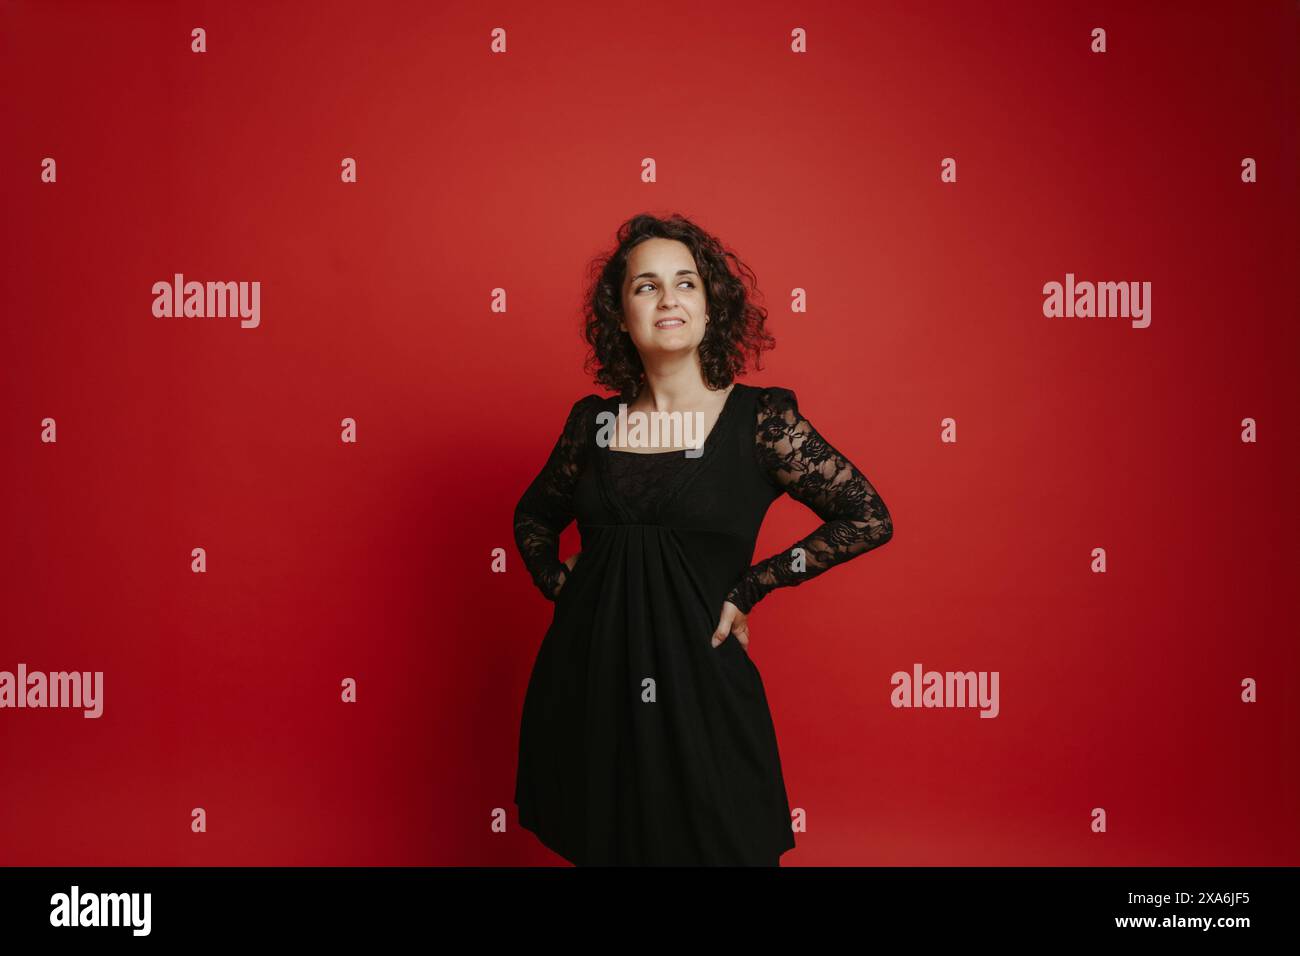 A fashionable woman posing against a vibrant red wall Stock Photo